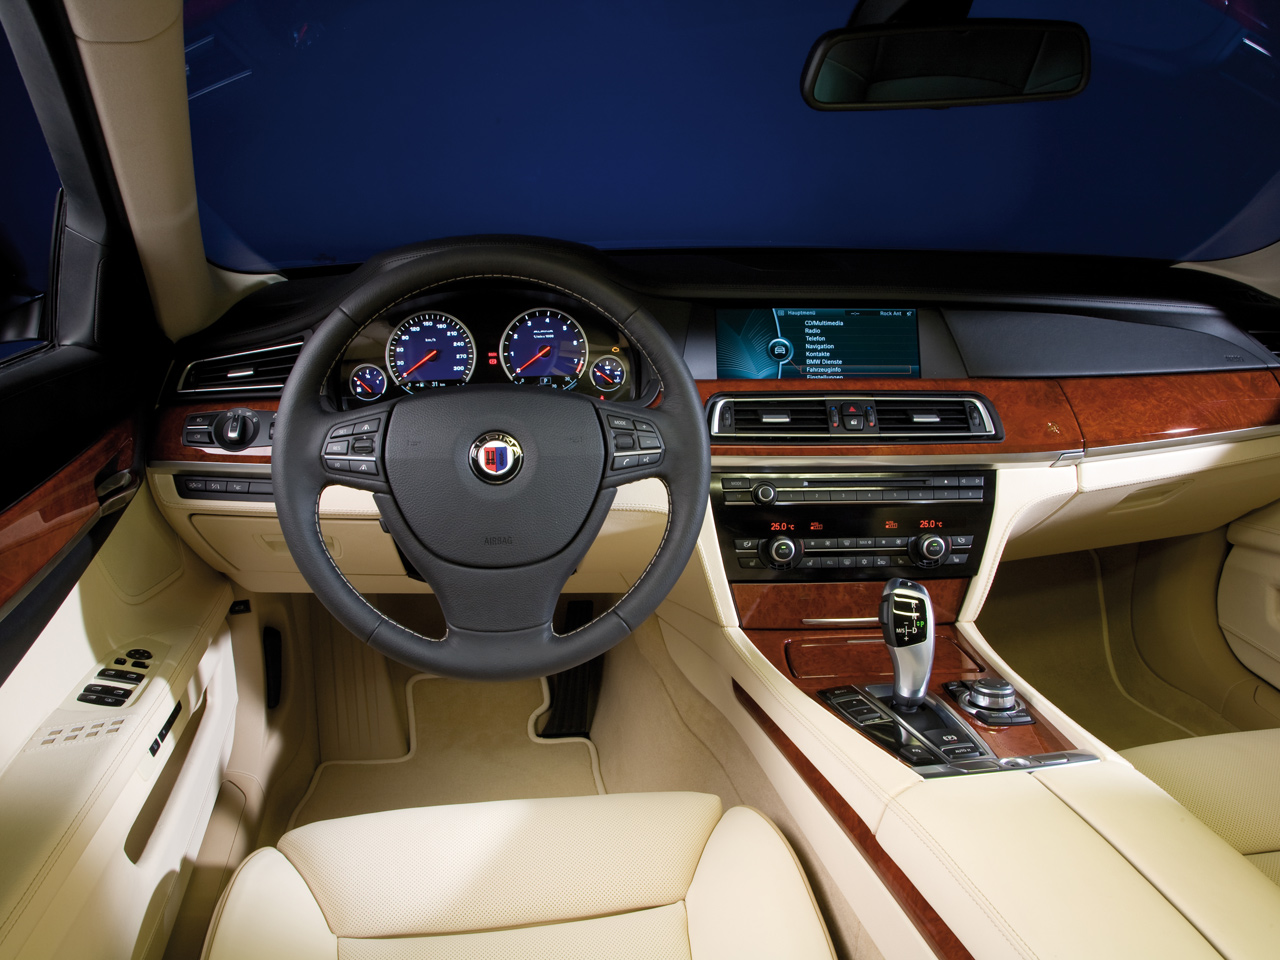 BMW Alpina B7 - The Perfect BMW with Ample Power and High-End Luxury